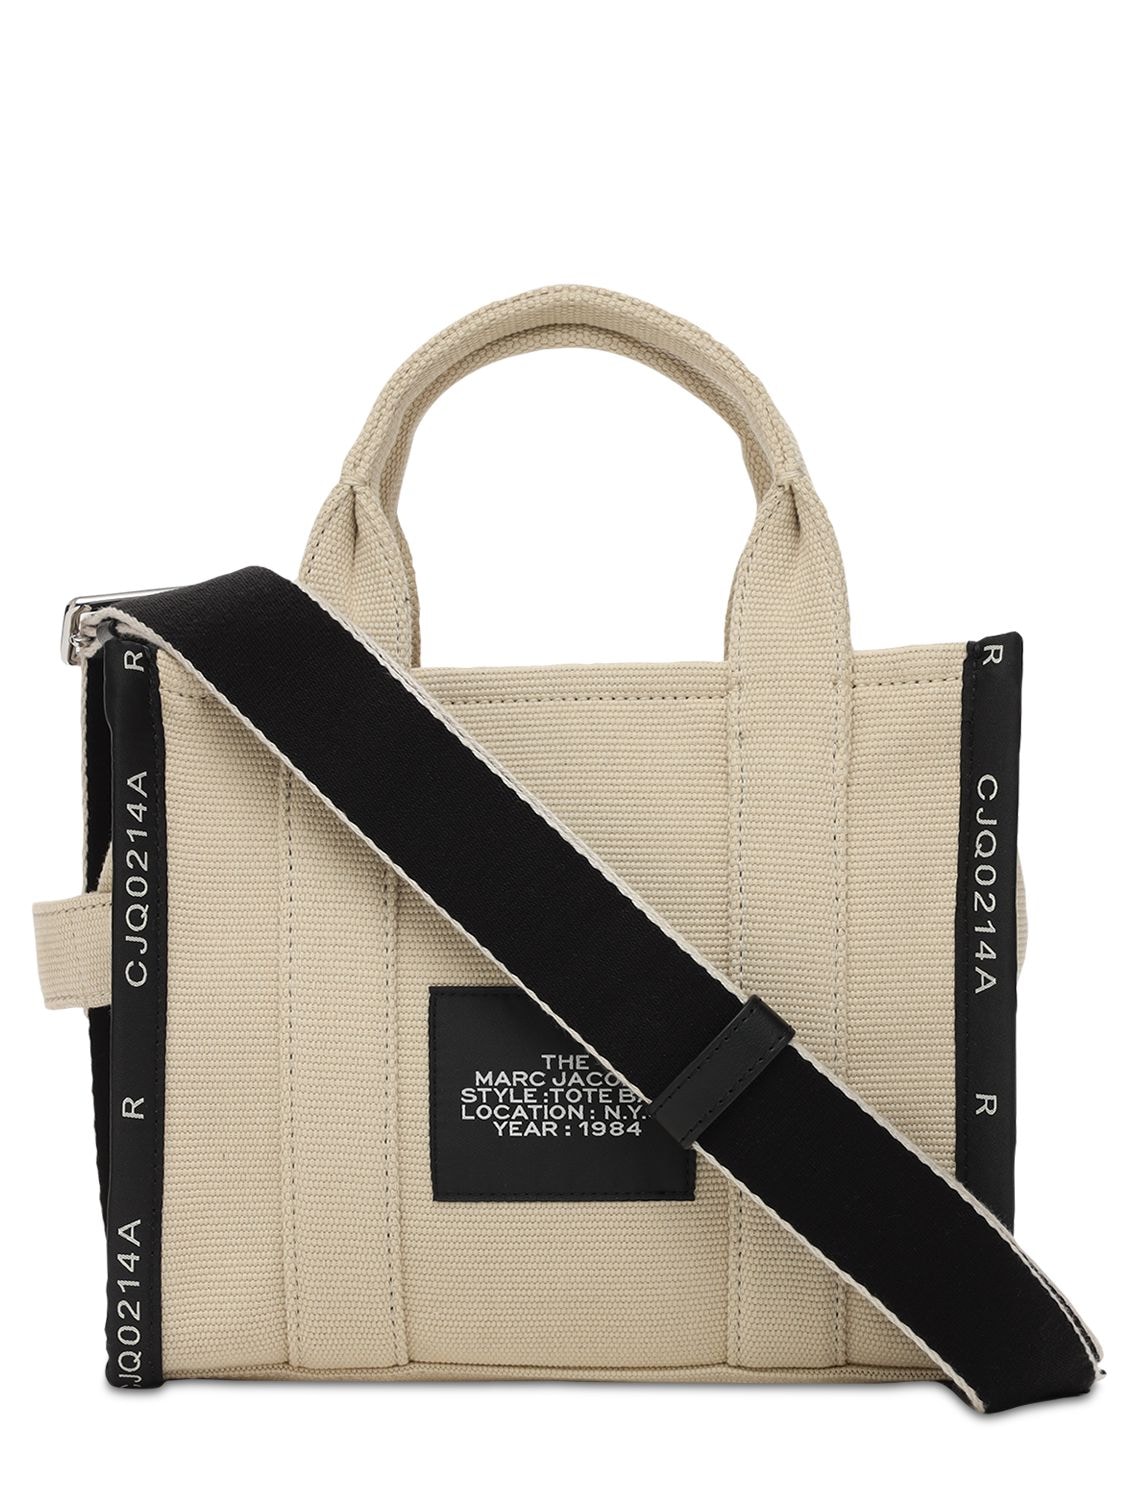 Marc Jacobs The Mini Tote Cotton Canvas Bag In Warm Sand | ModeSens